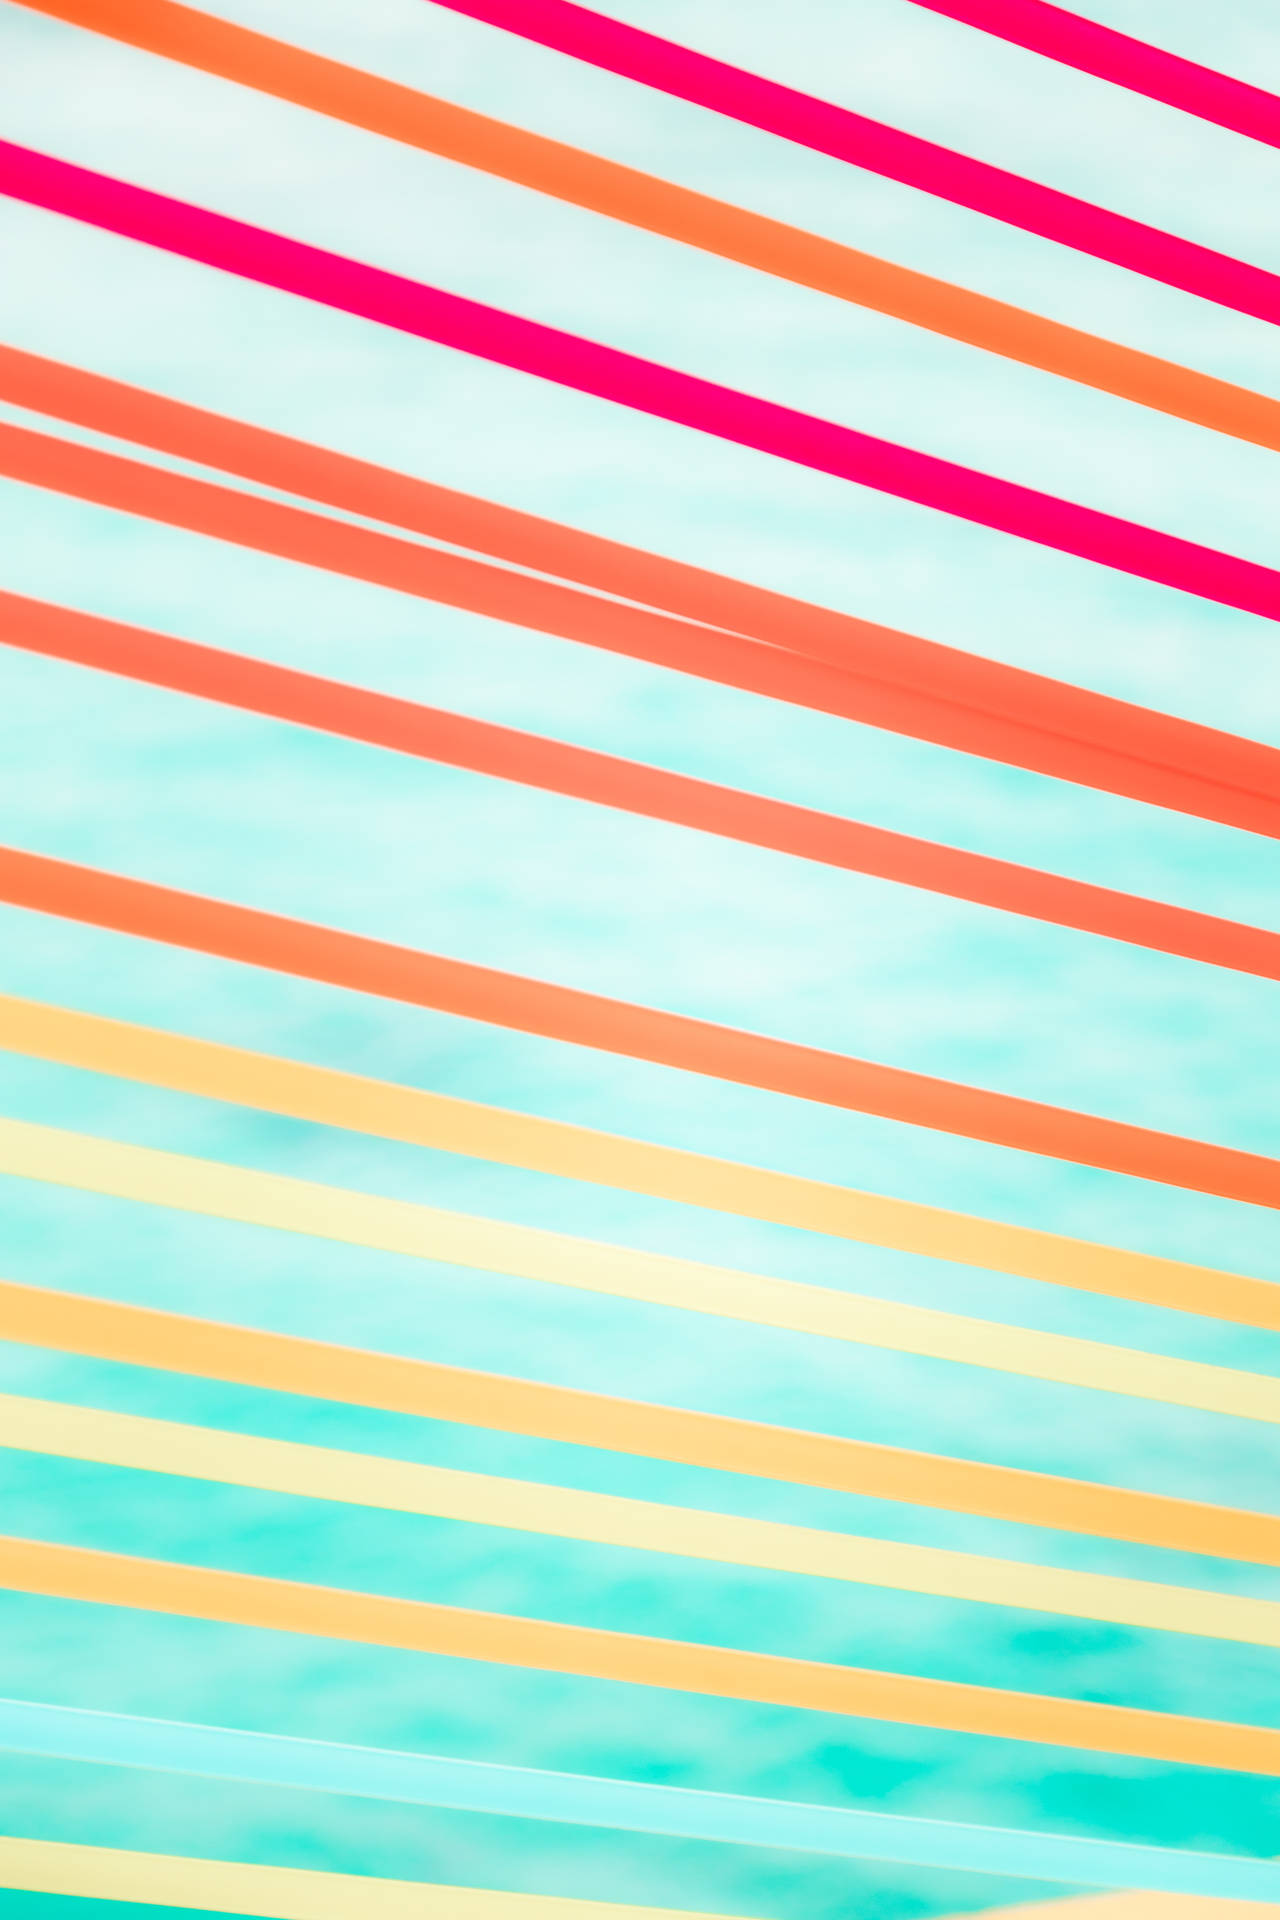 Colorful Diagonal Striped Gradient Background